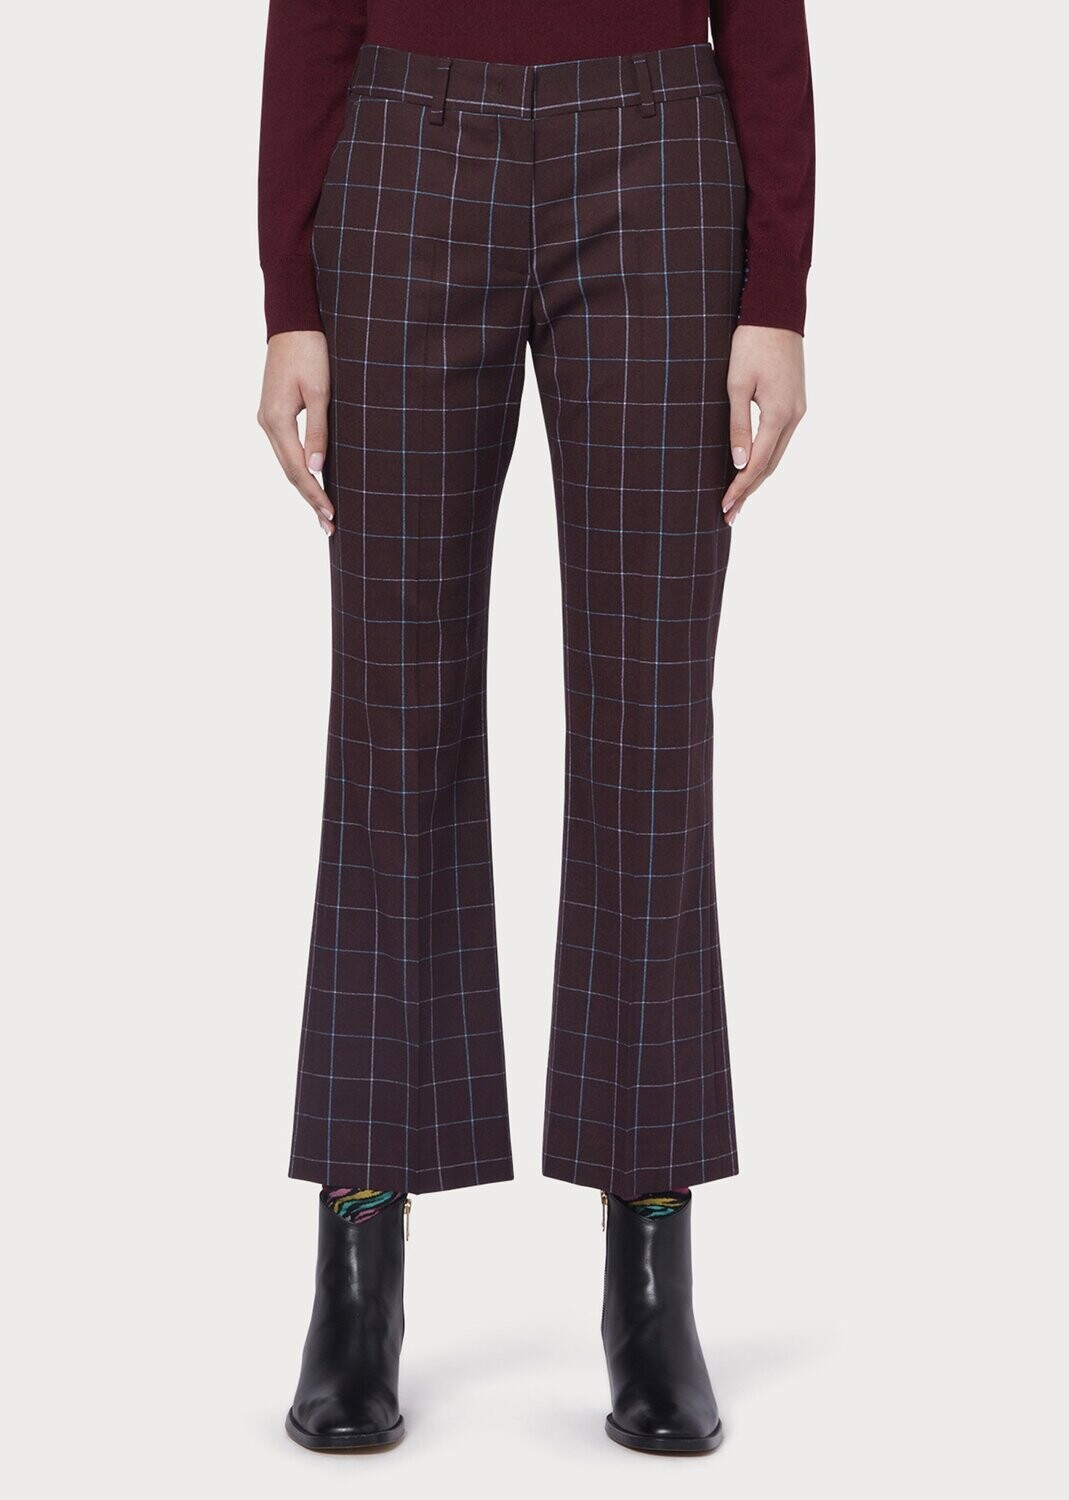 Paul Smith Burgundy Check Wool Cropped Trousers